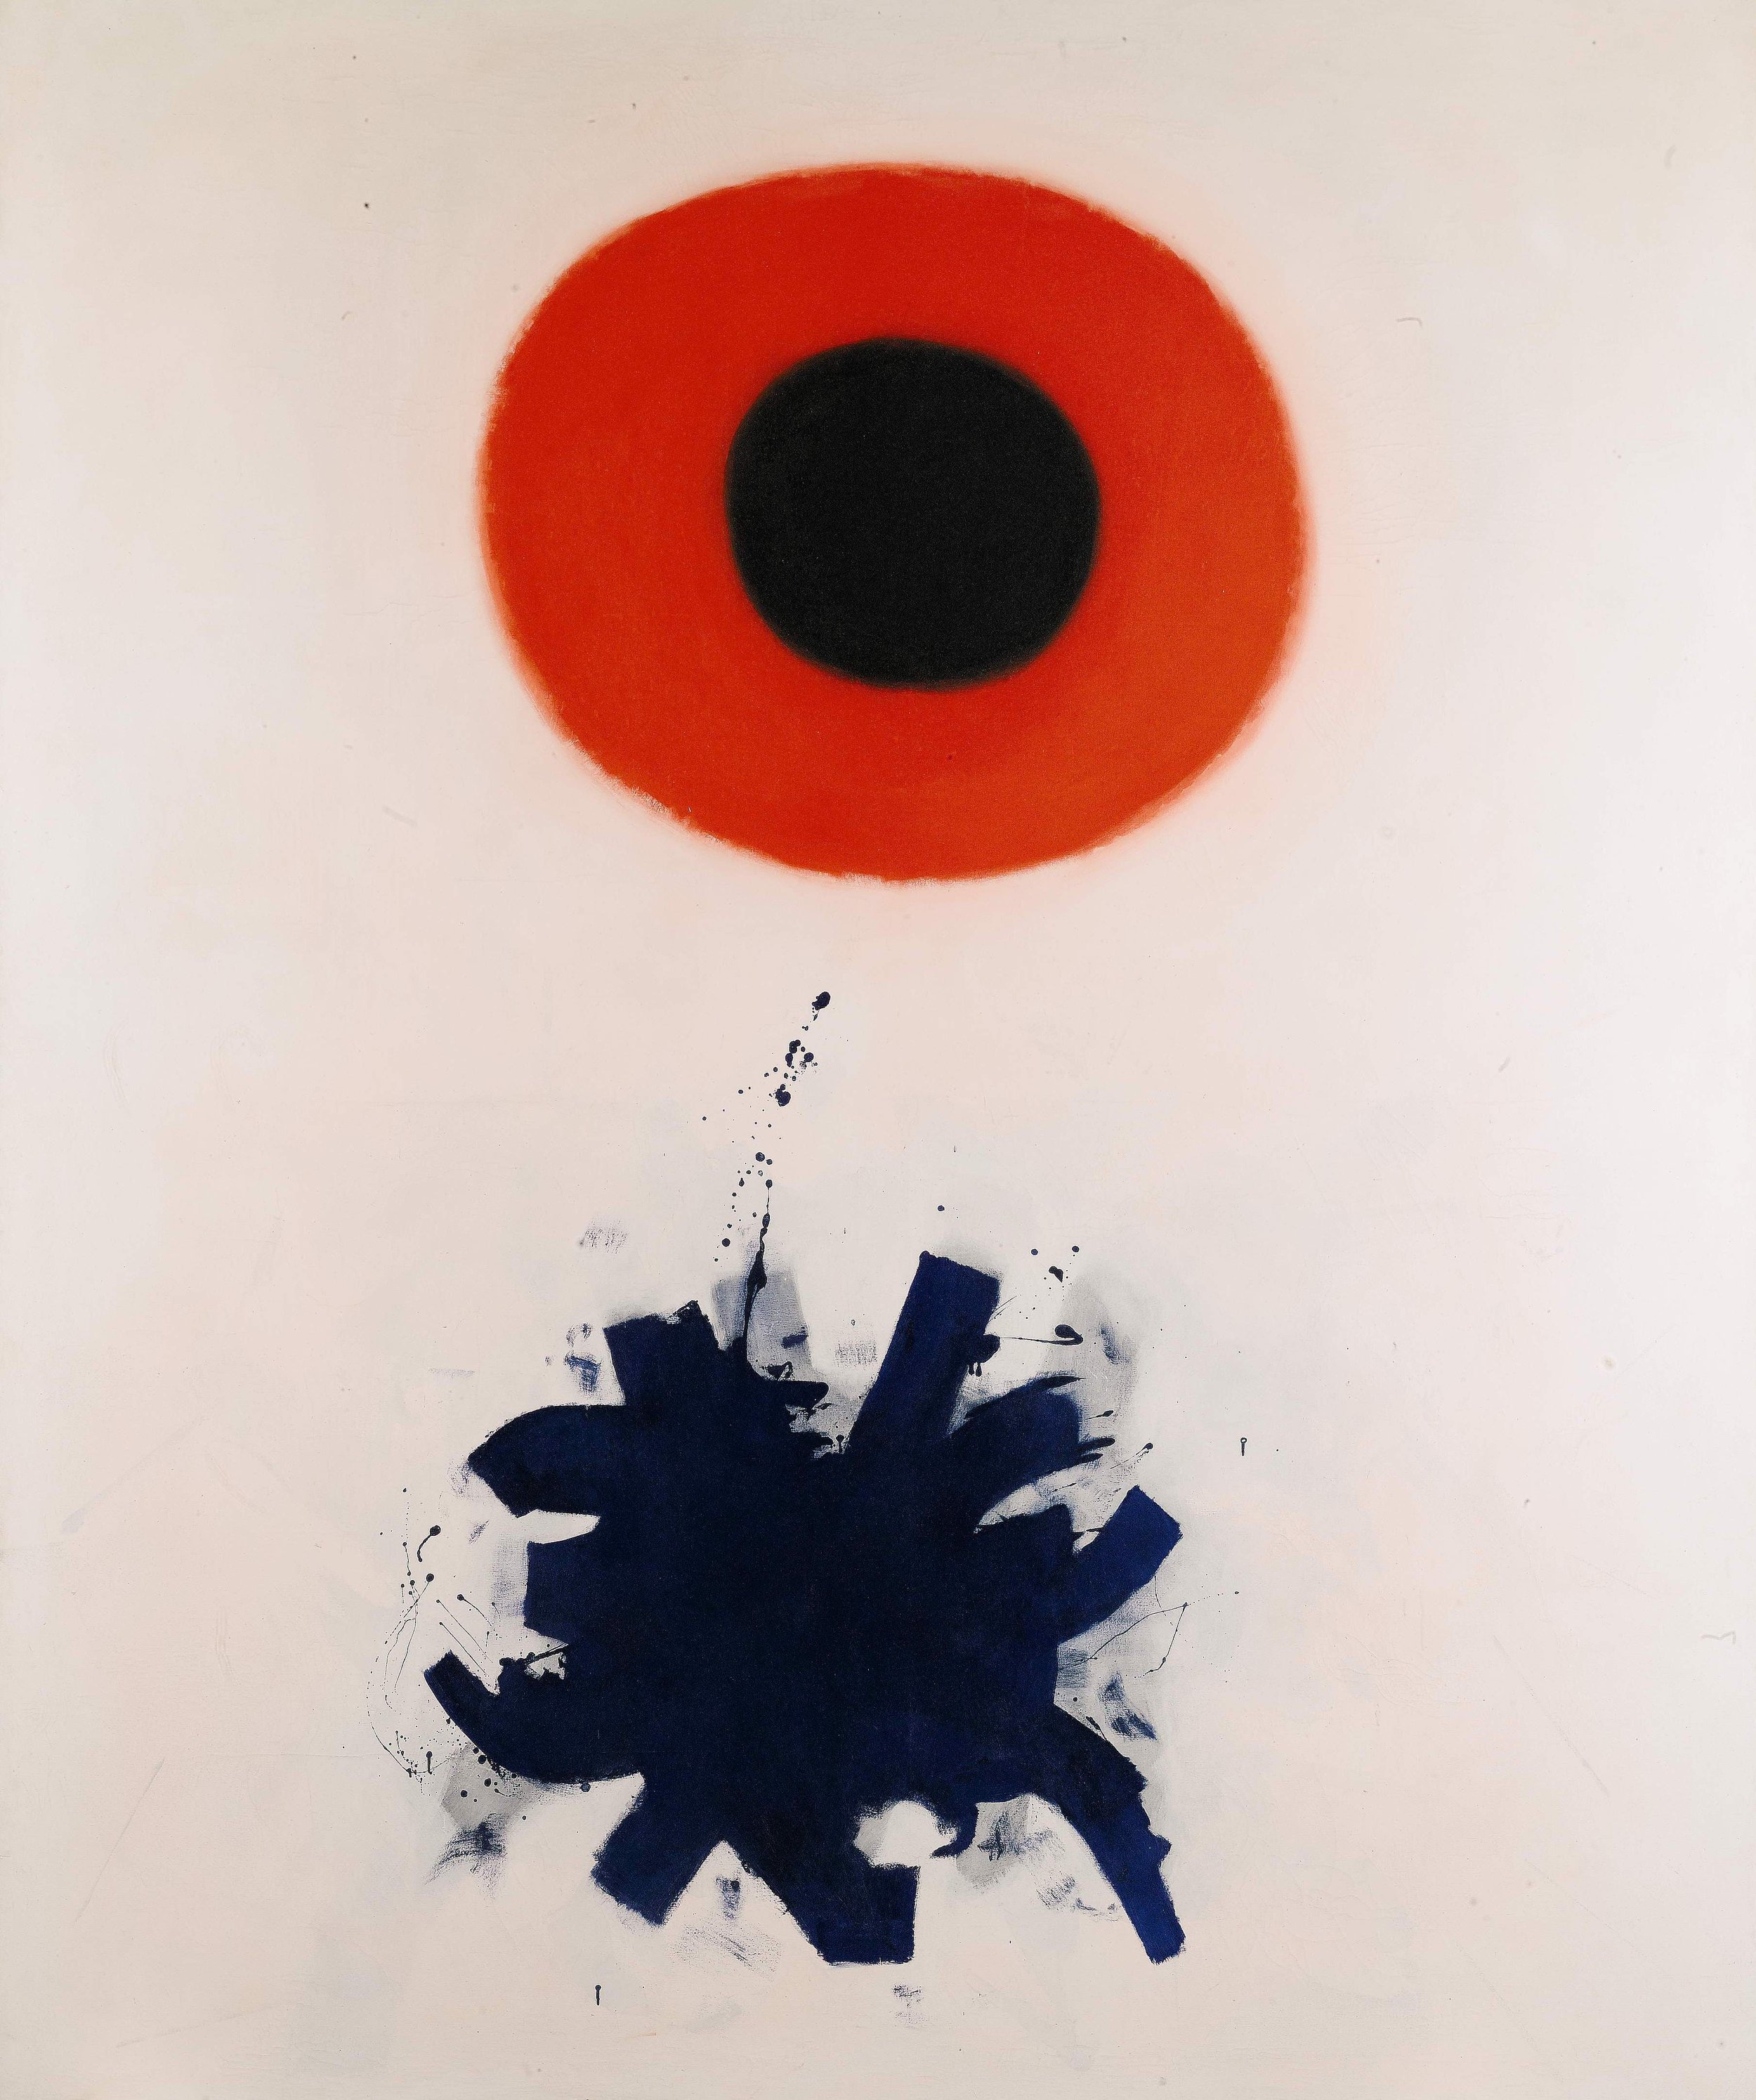  Adolph Gottlieb   Red and Blue  1962-65 oil on canvas 108 x 90 inches 